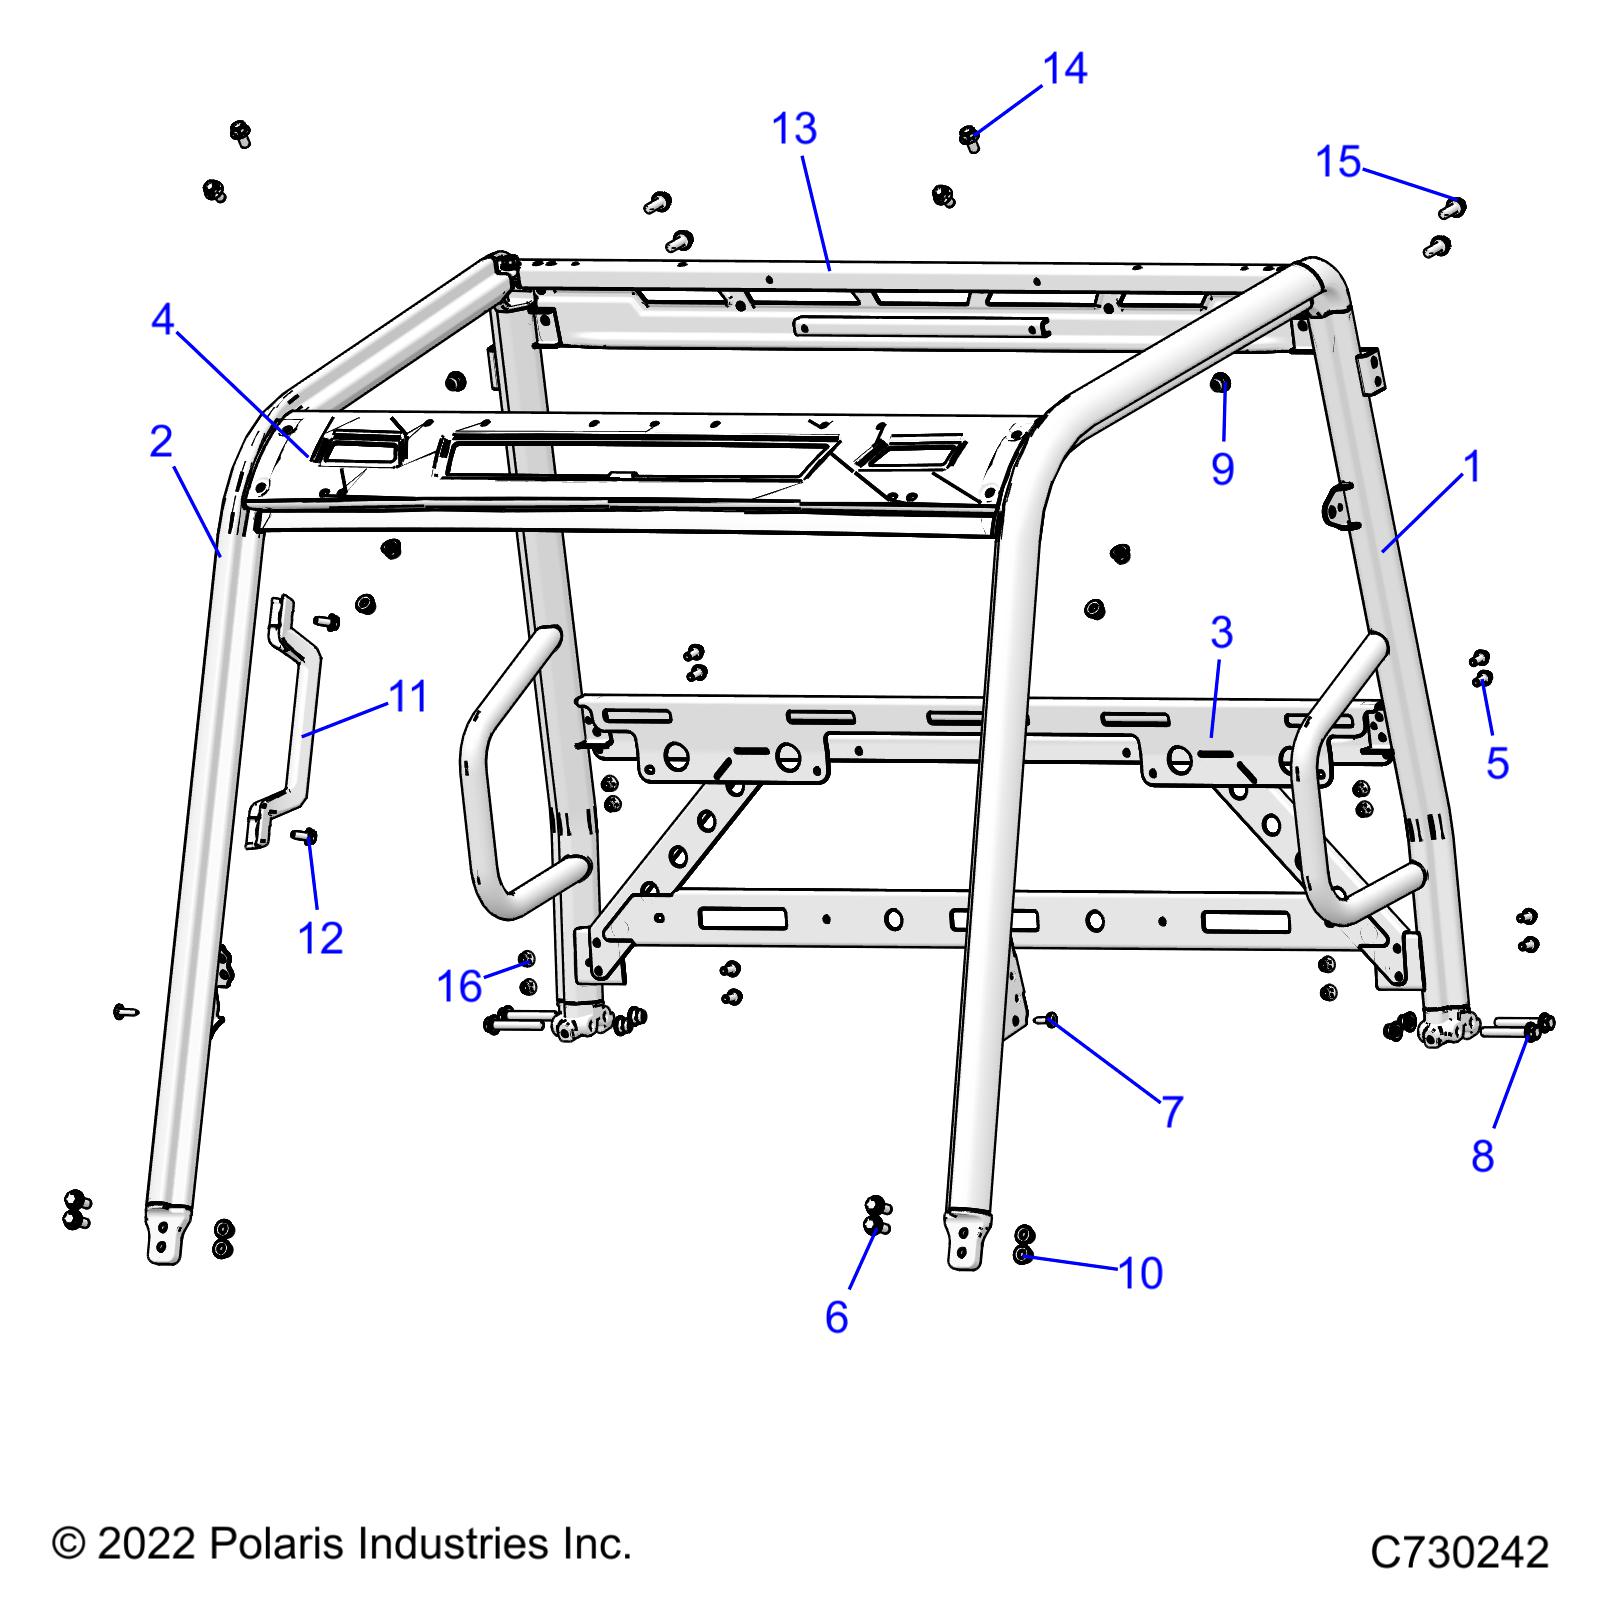 Part Number : 1022575-458 CAB FRAME WELD  REAR  LOWER  M